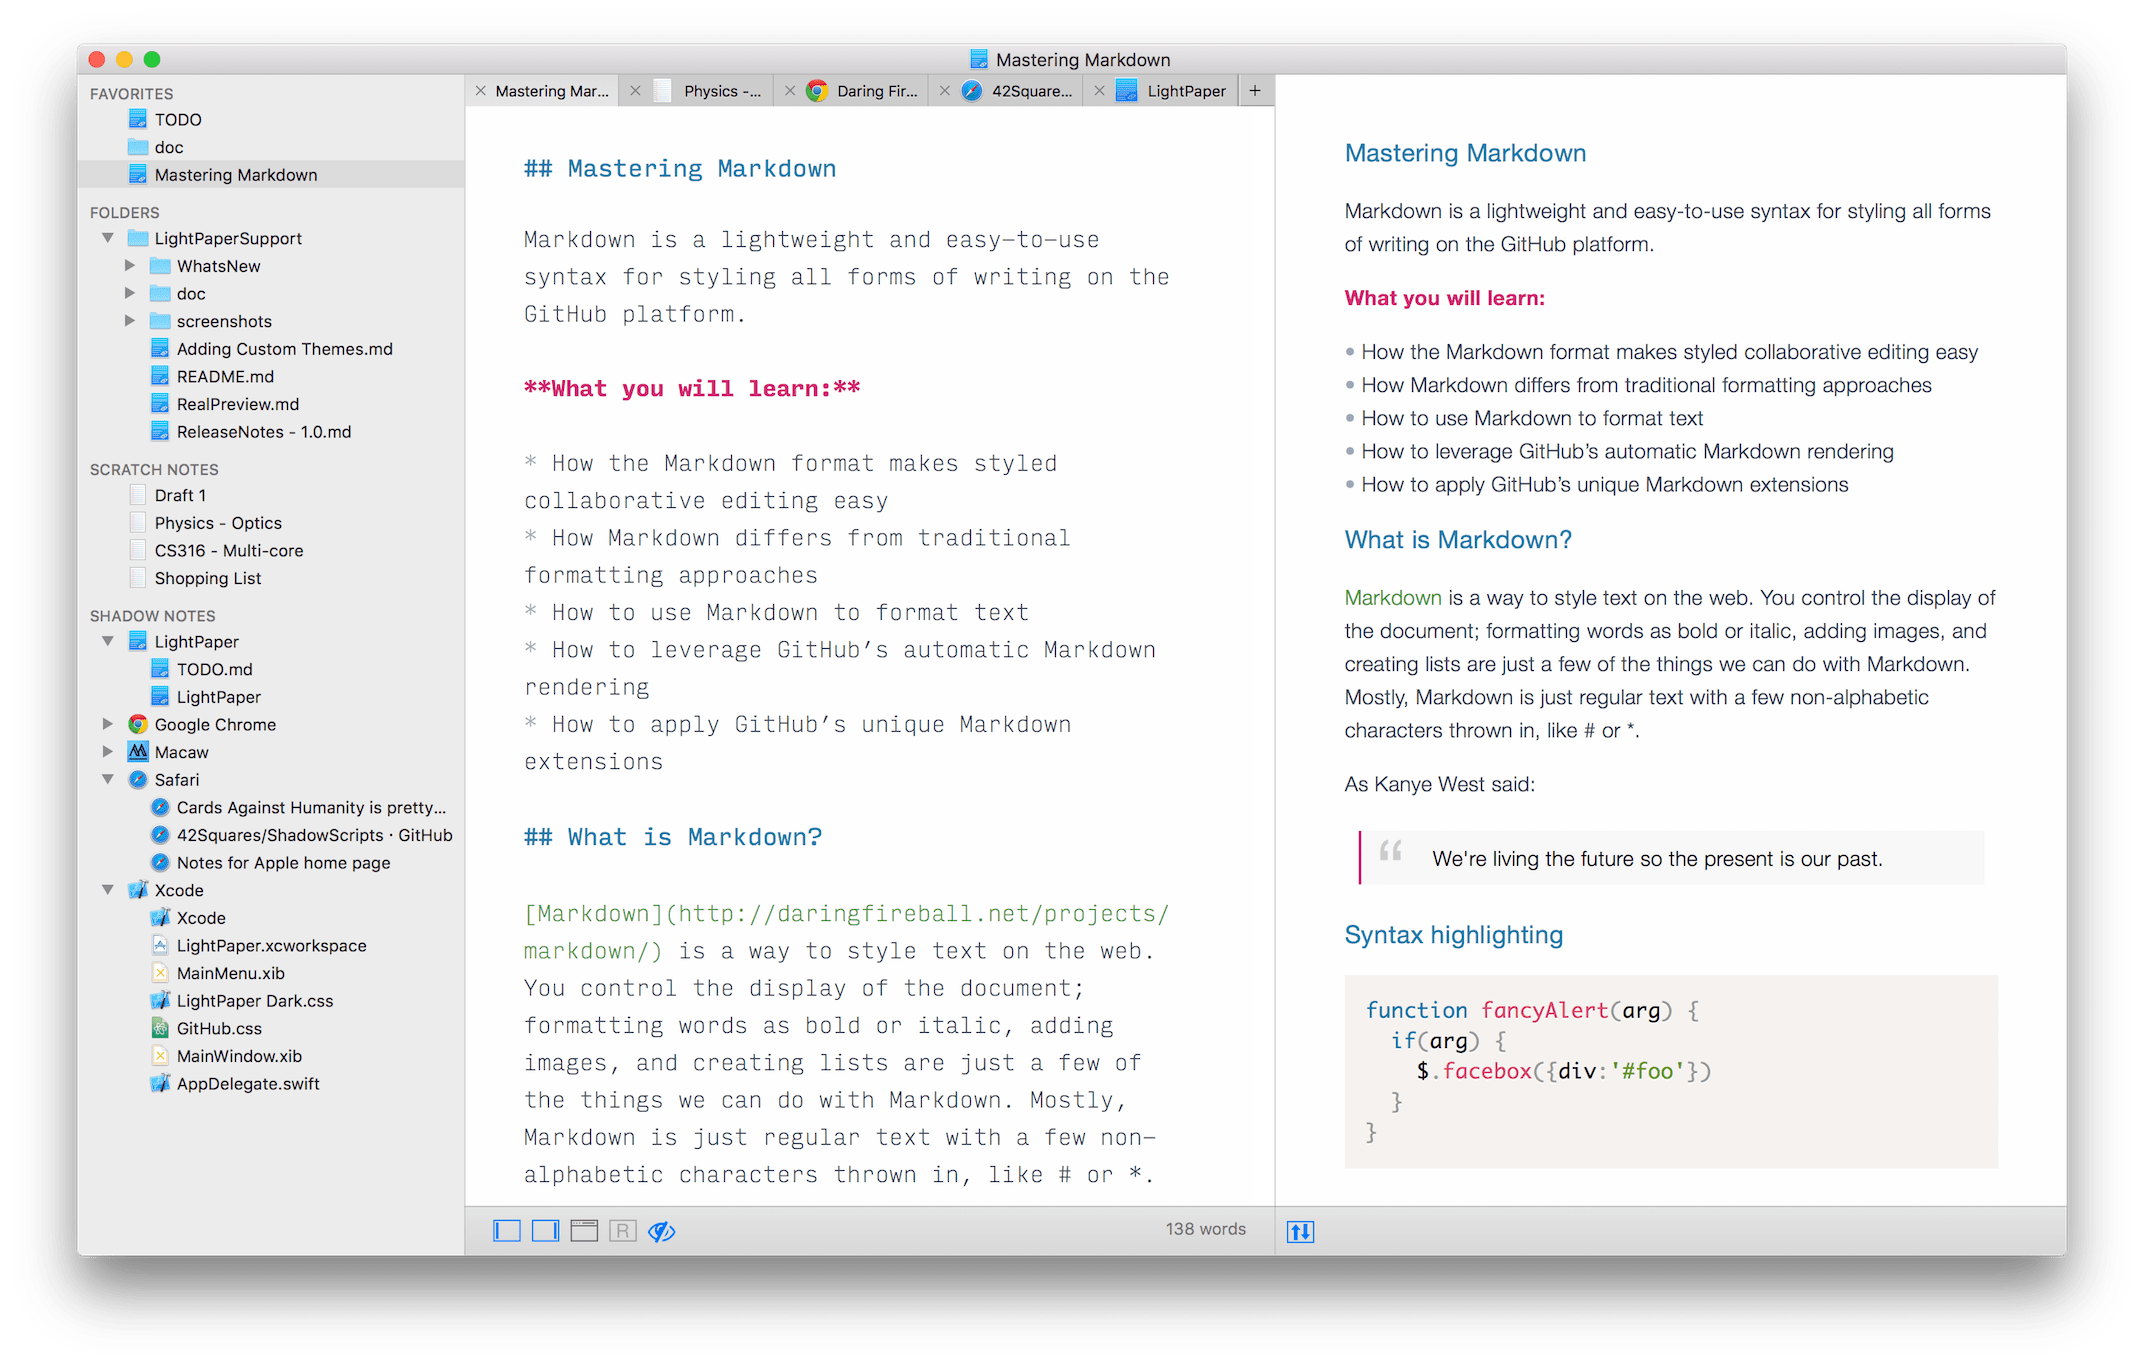 Writing app for Mac users from LightPaper